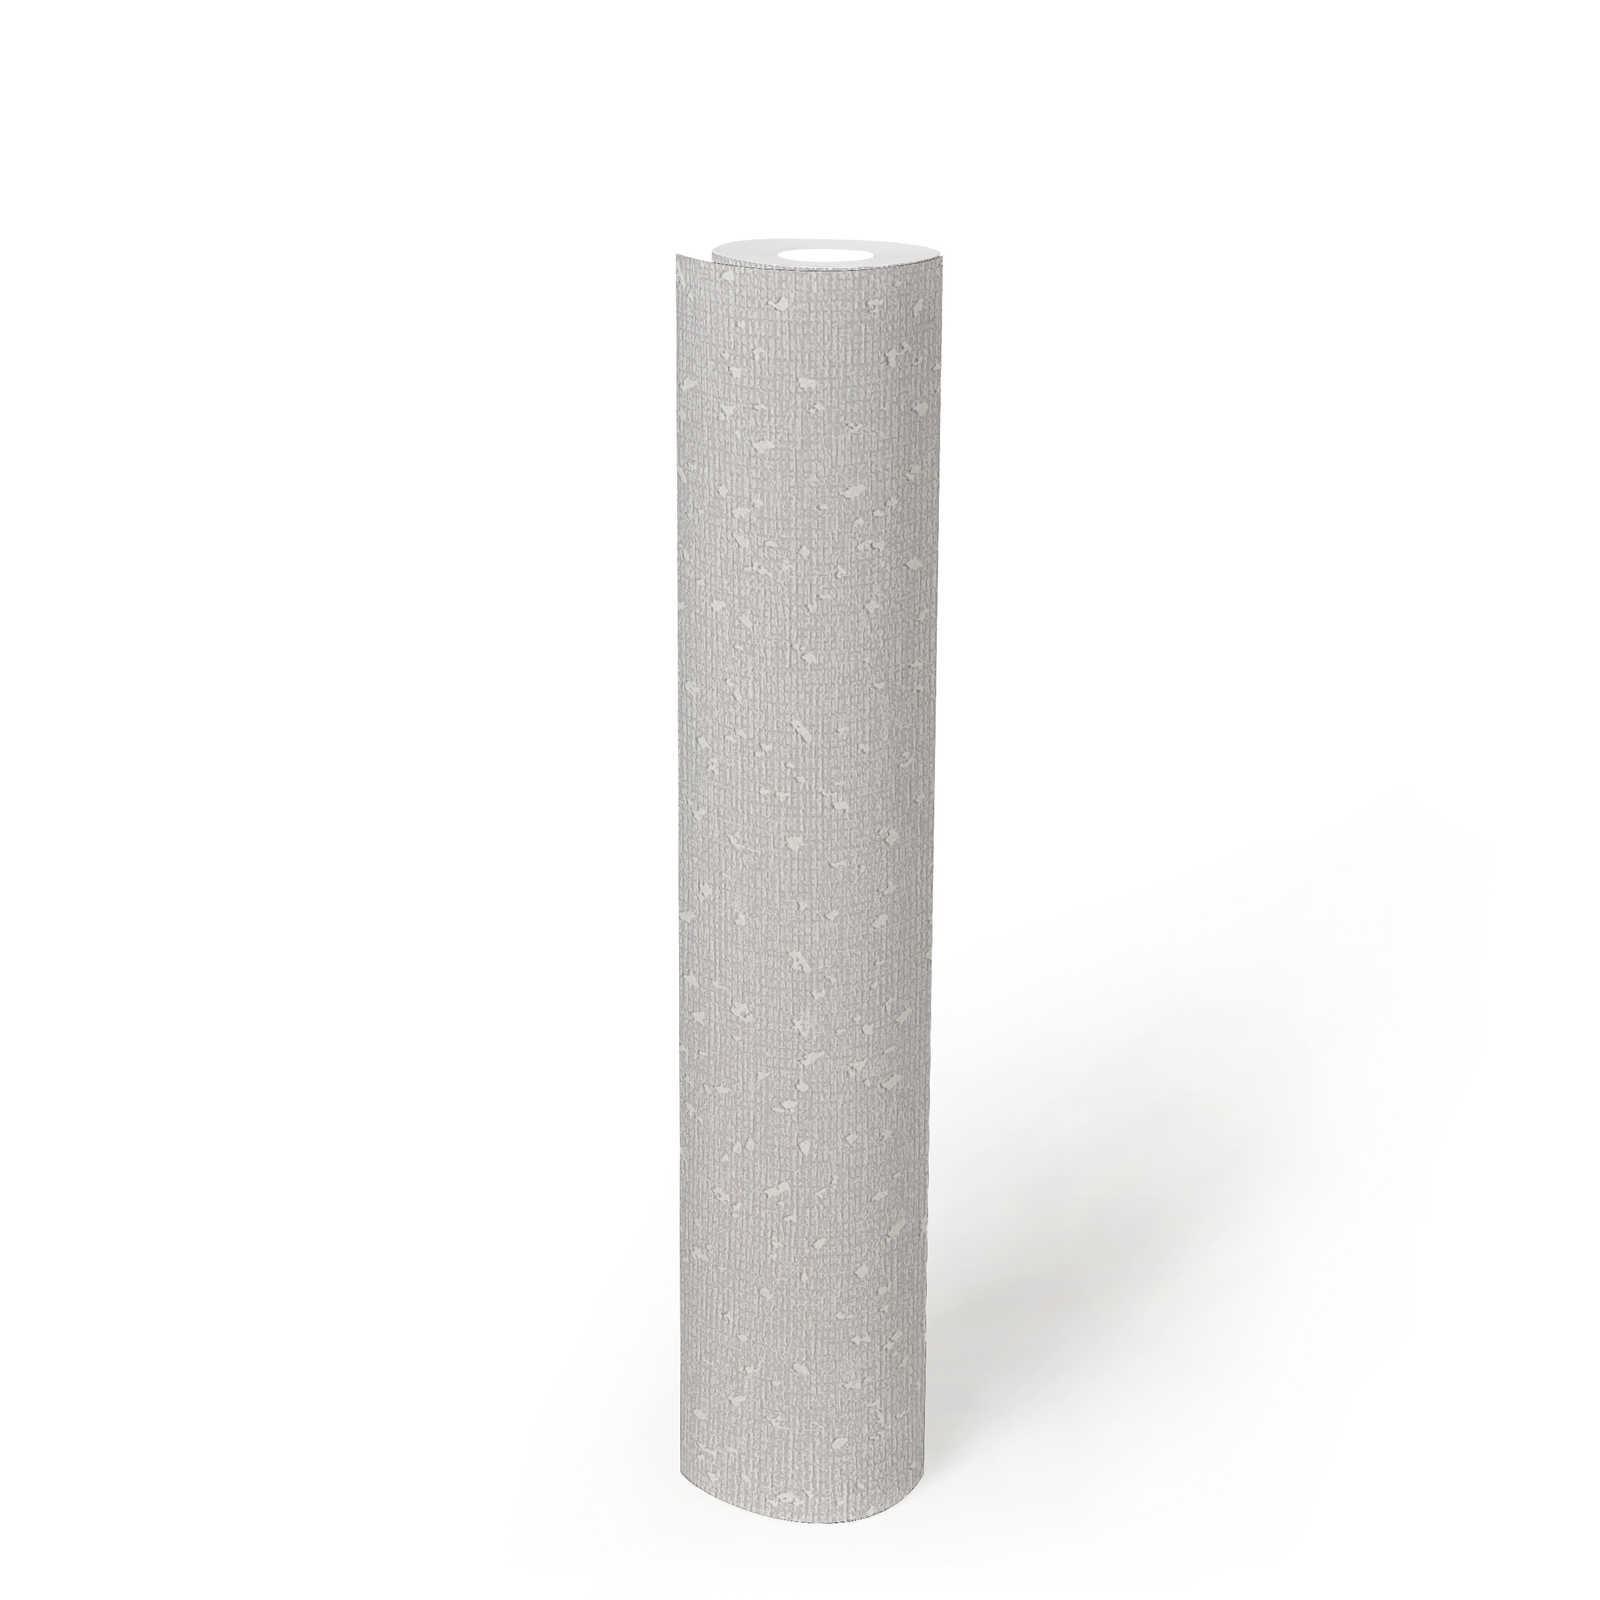             Wallpaper with textile structure and metallic accent - white, grey
        